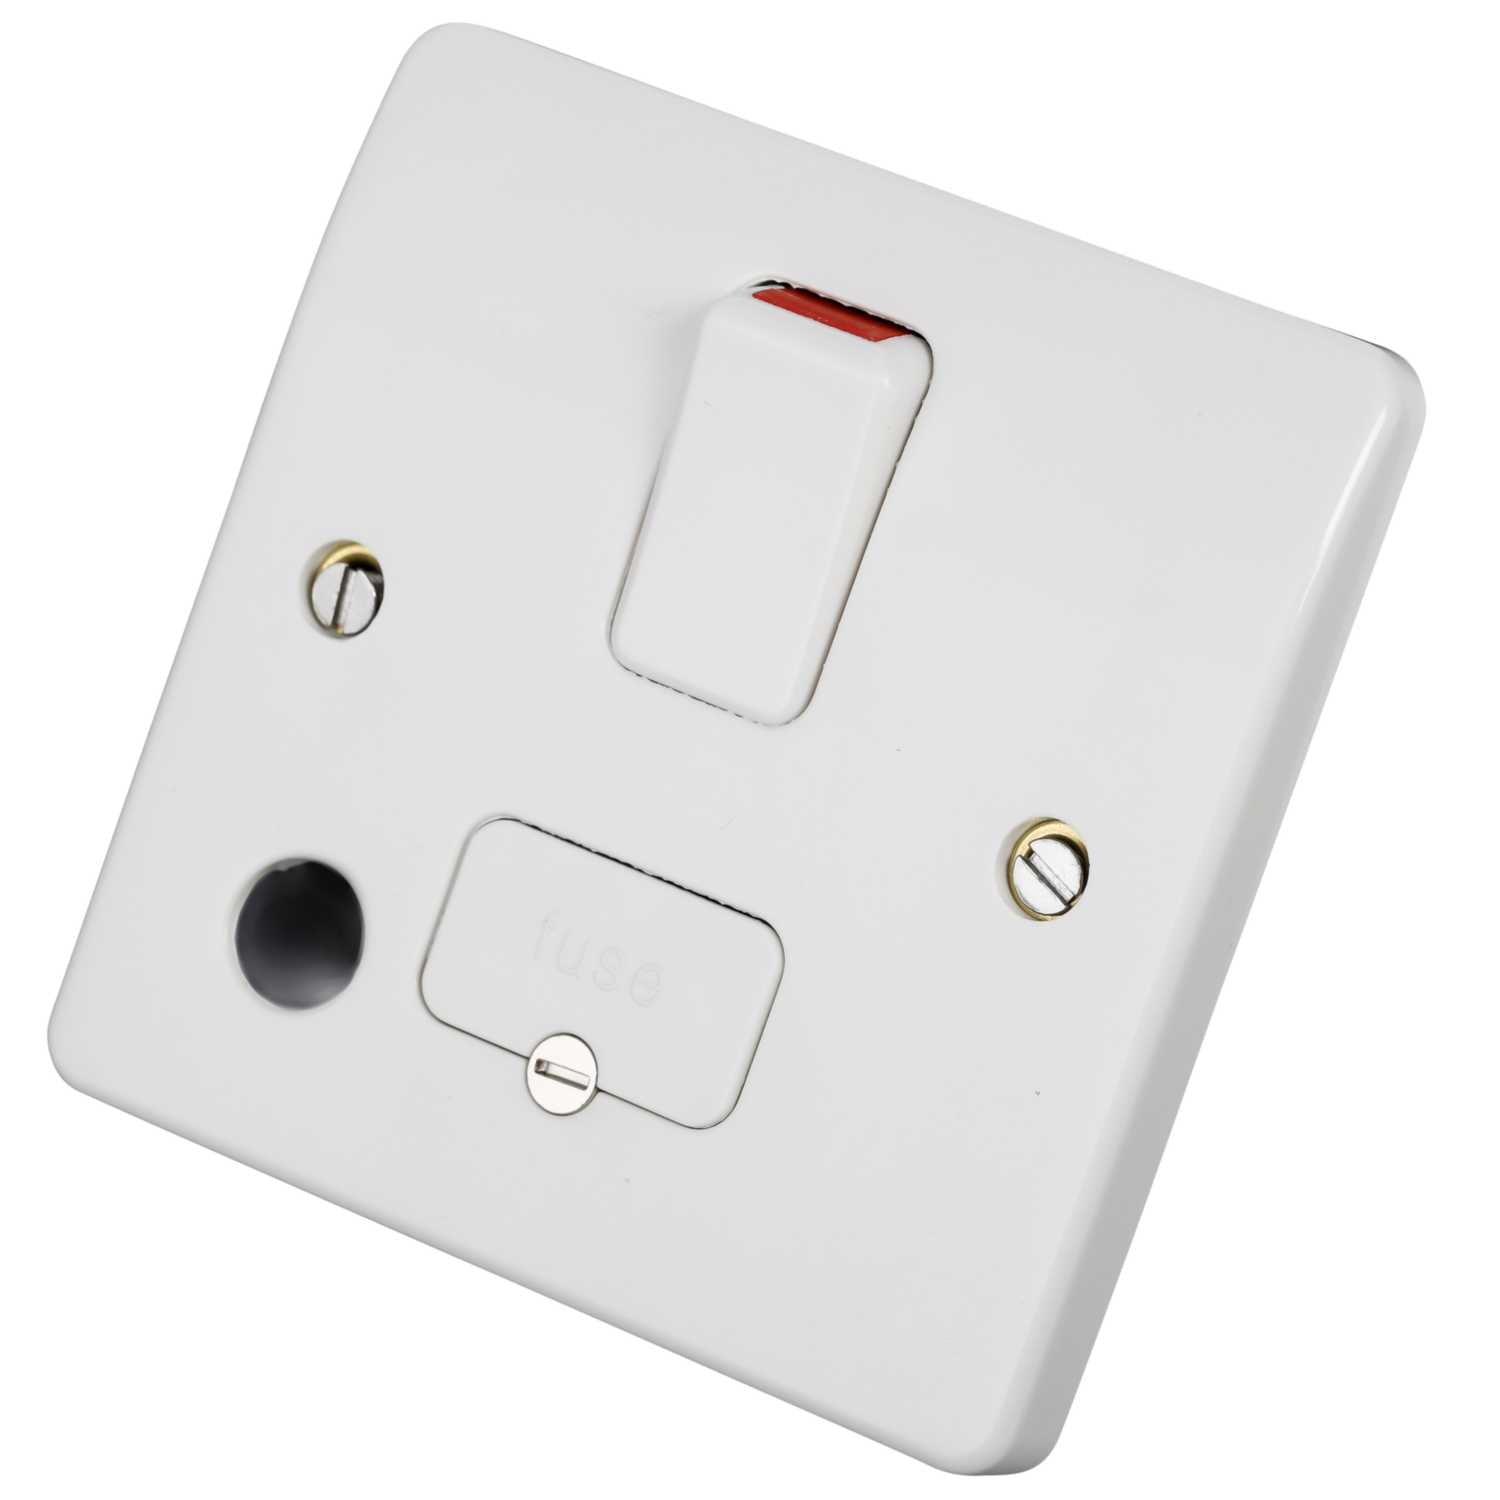 MK LOGIC PLUS 13A SWITCHED FUSED SPUR & FLEX OUTLET WHITE (13479)